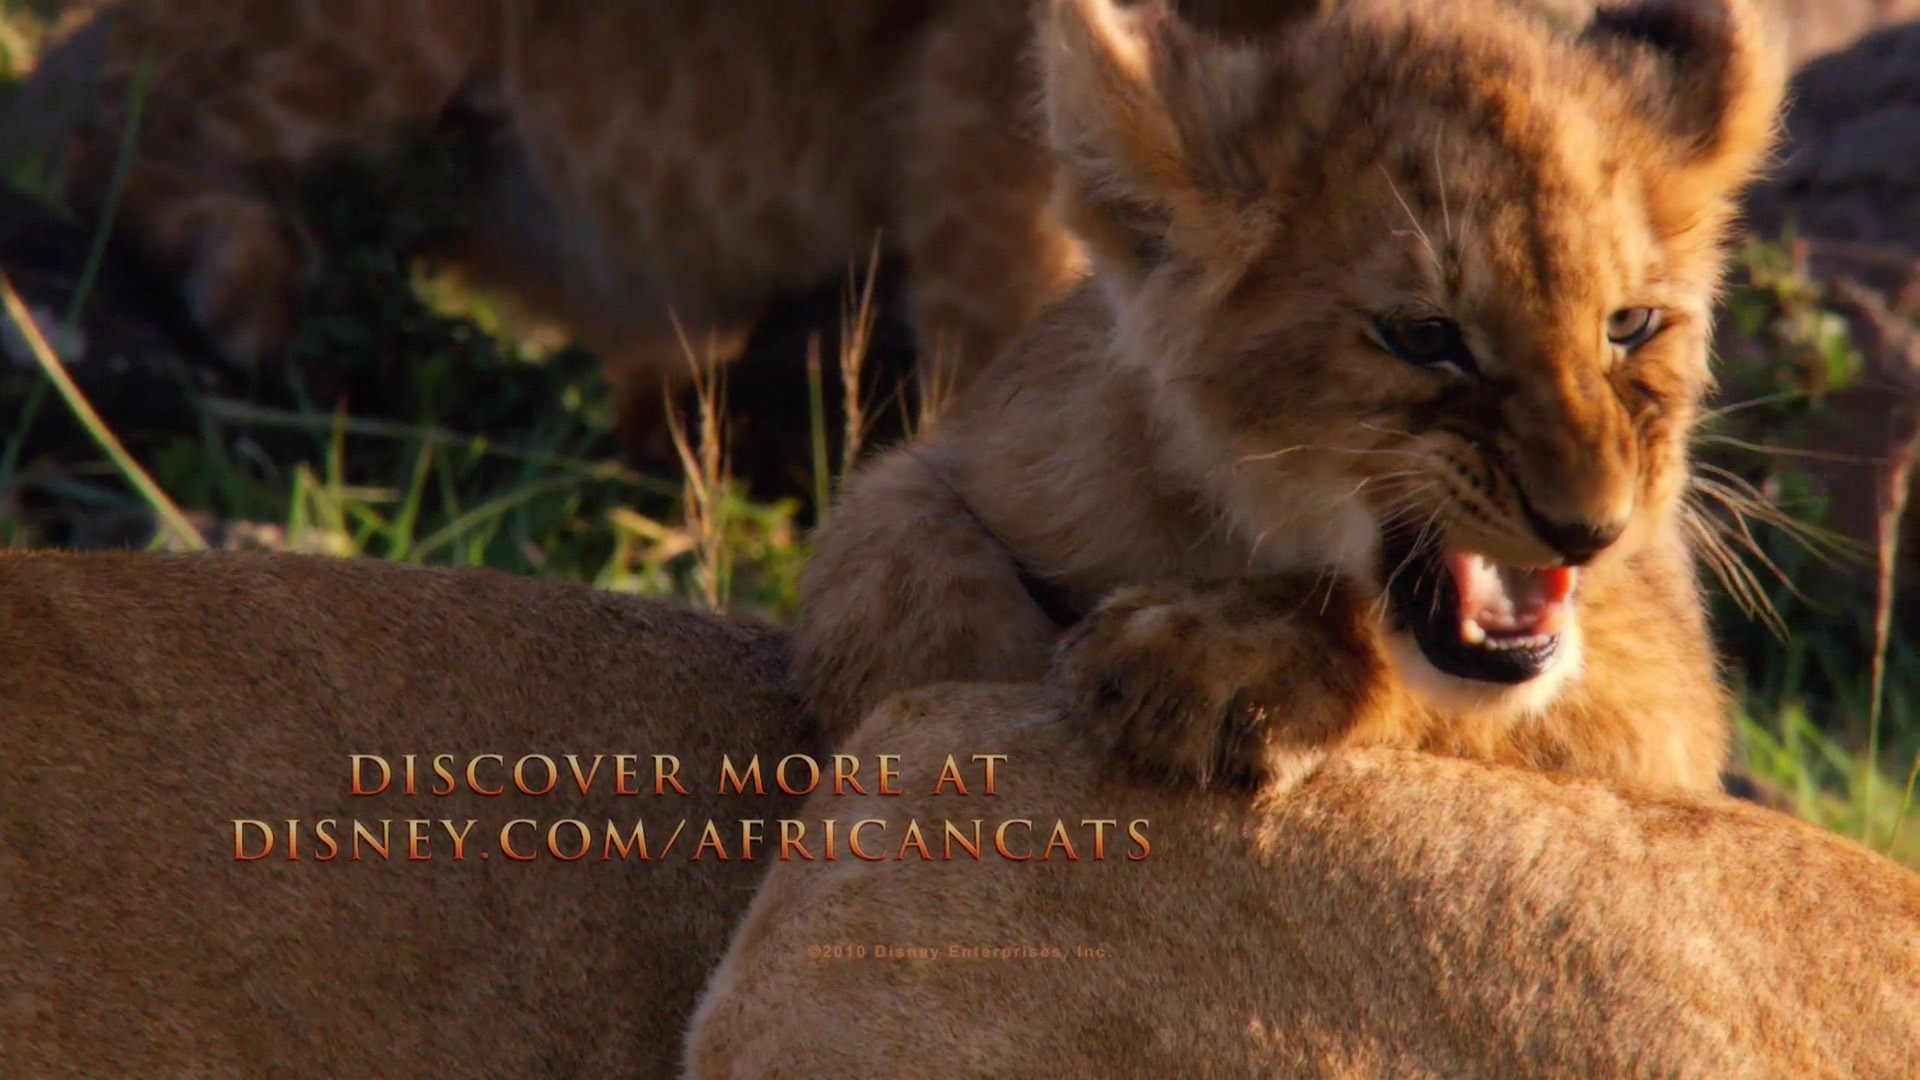 African Cats: Kingdom of Courage wallpapers #12 - 1920x1080